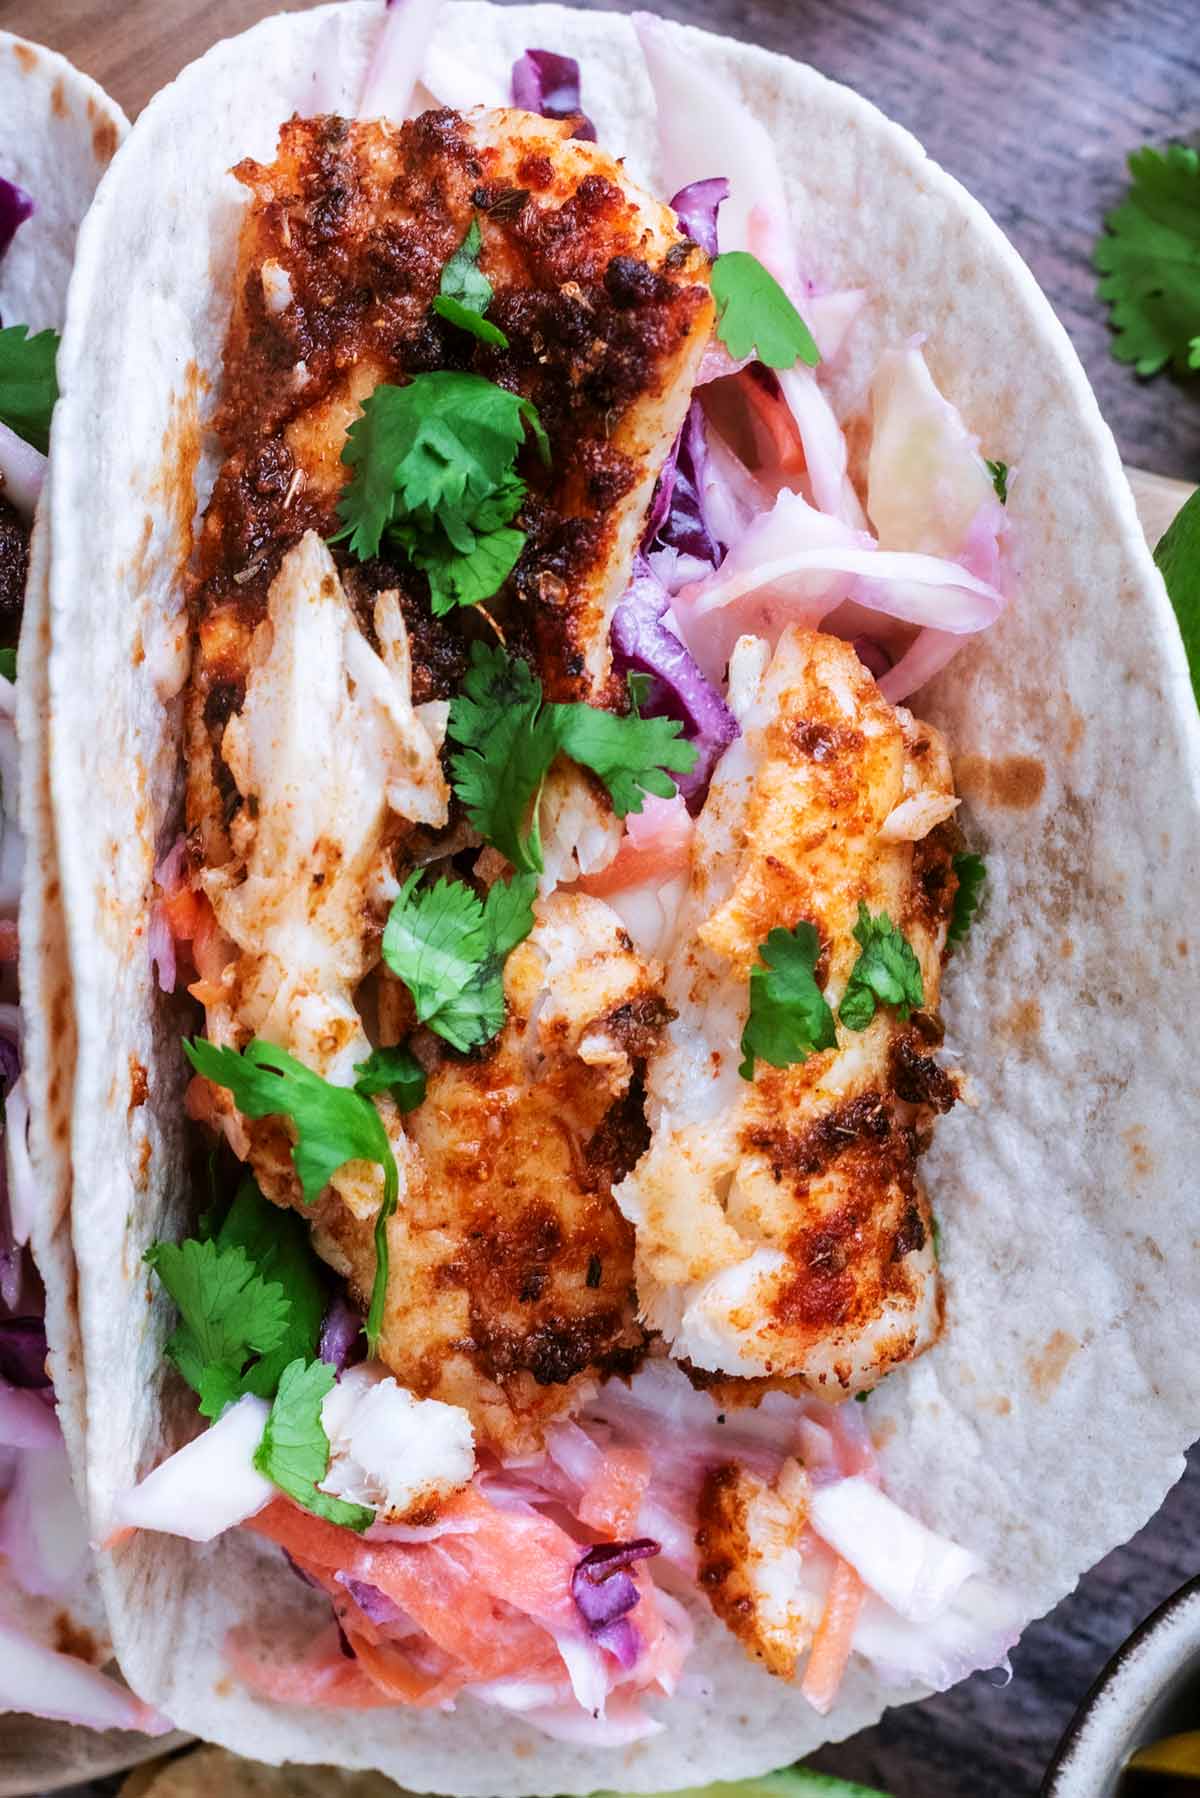 Cooked seasoned cod in a soft taco shell with slaw and coriander.